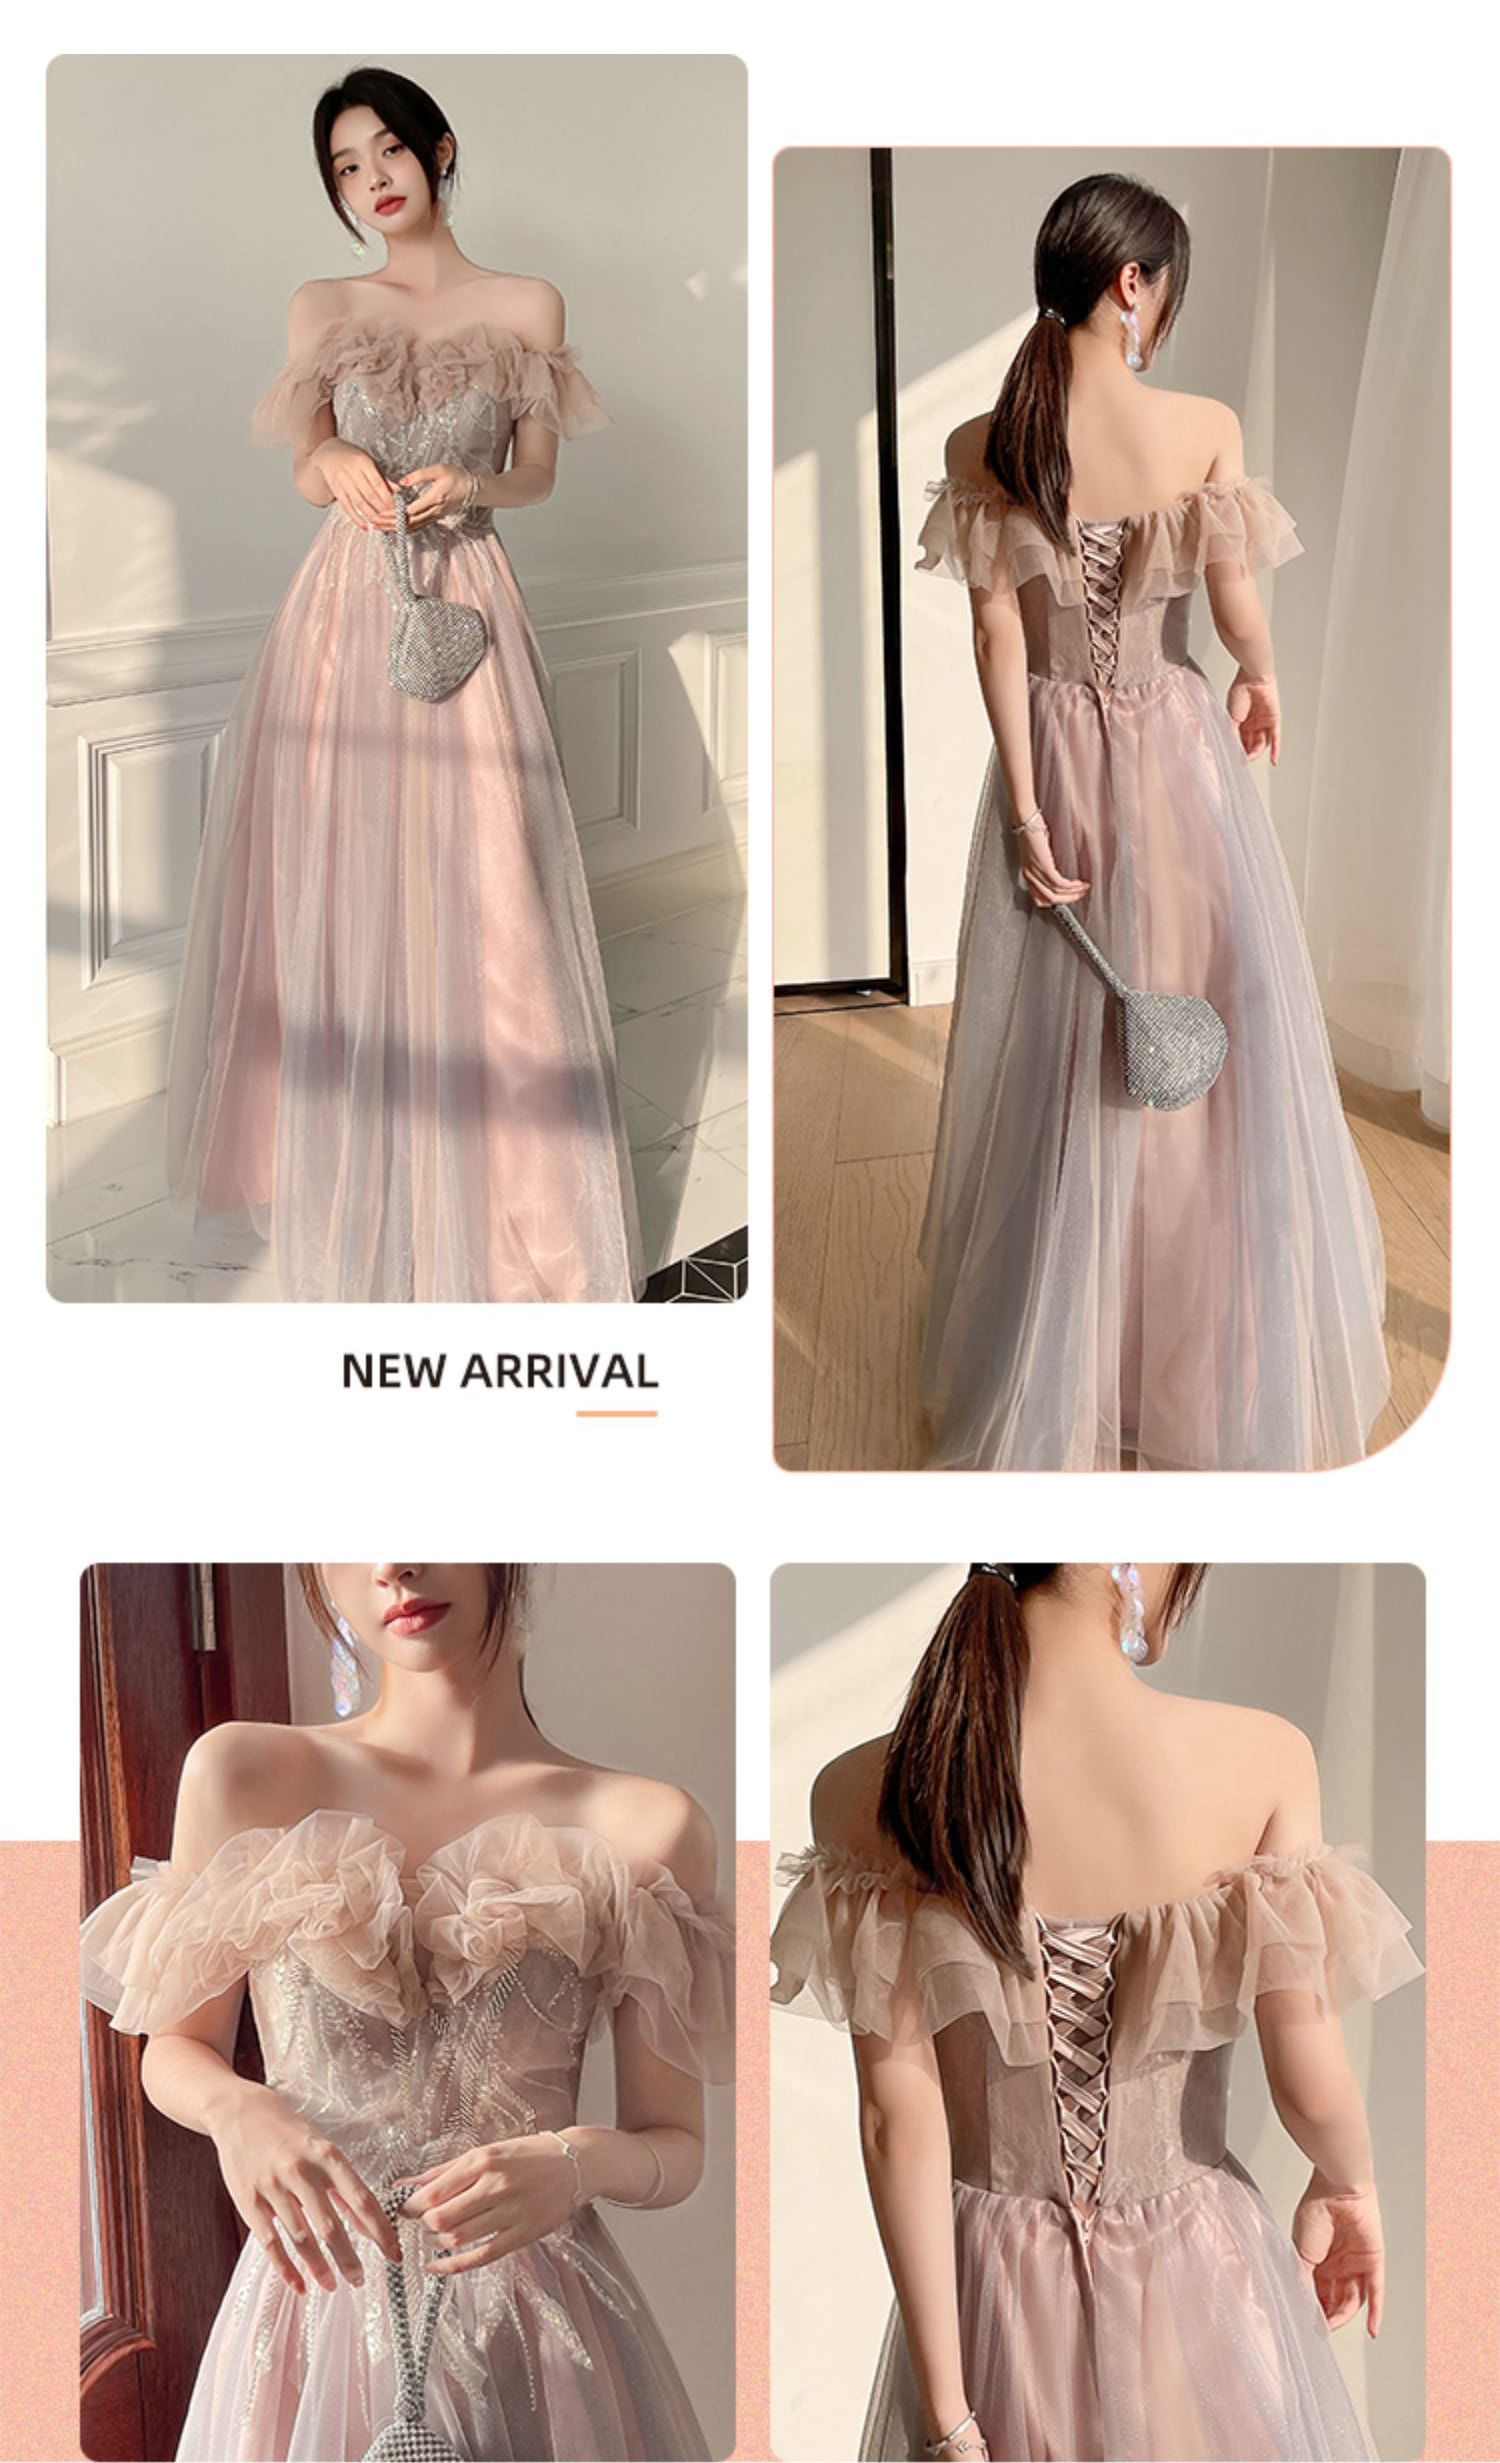 Elegant-Pale-Pink-Maxi-Bridesmaid-Dress-Long-Party-Ball-Gown16